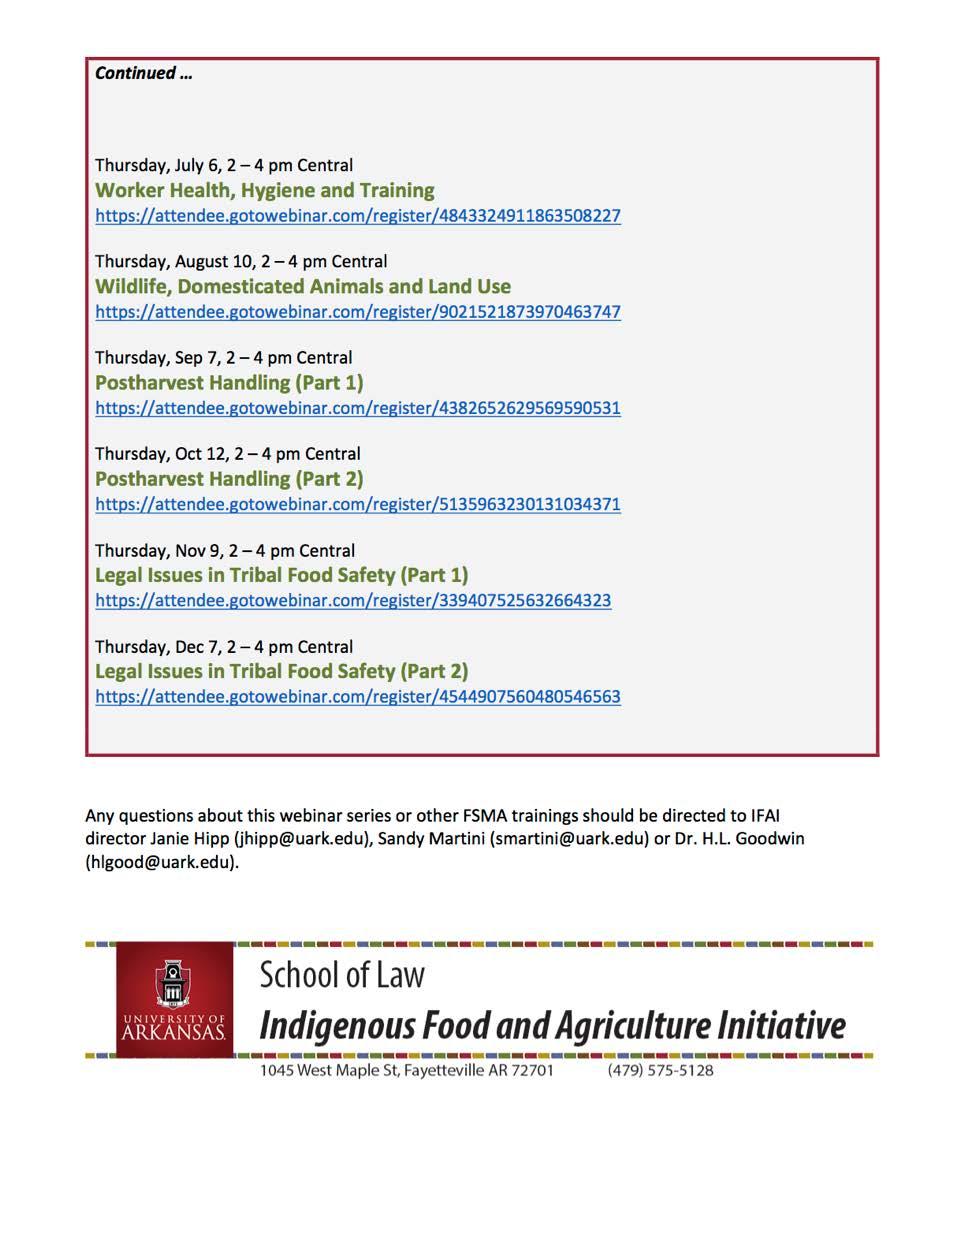 The Indigenous Food and Agriculture Initiative (IFAI) was selected by the Food and Drug Administration (FDA) to provide Native American Outreach, Training, Technical Assistance and Education to